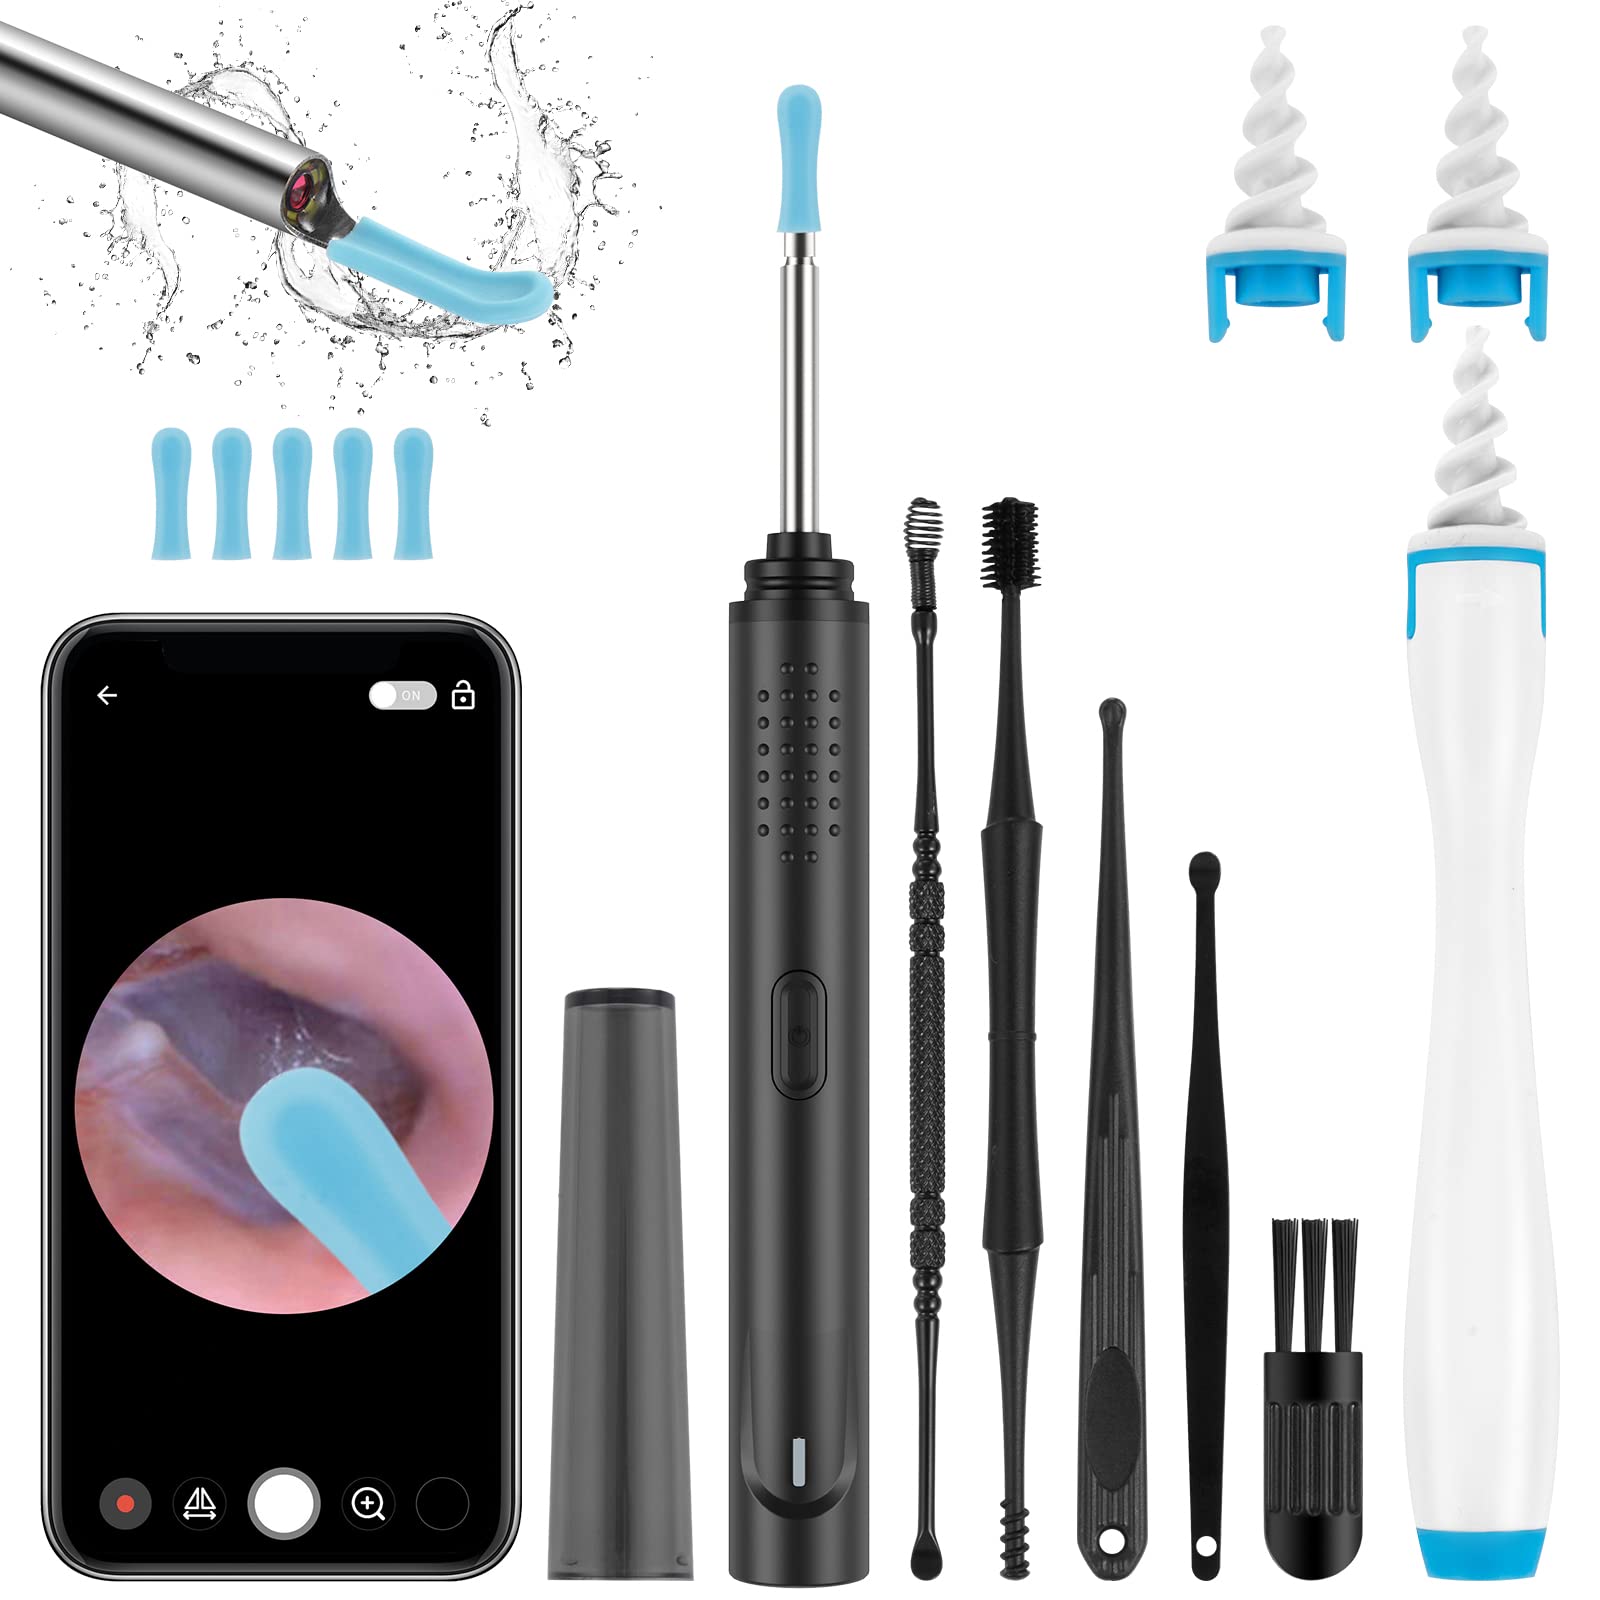 Ear Wax Removal Camera Ear Endoscope Spoon Pick Cleaning Tool Kit